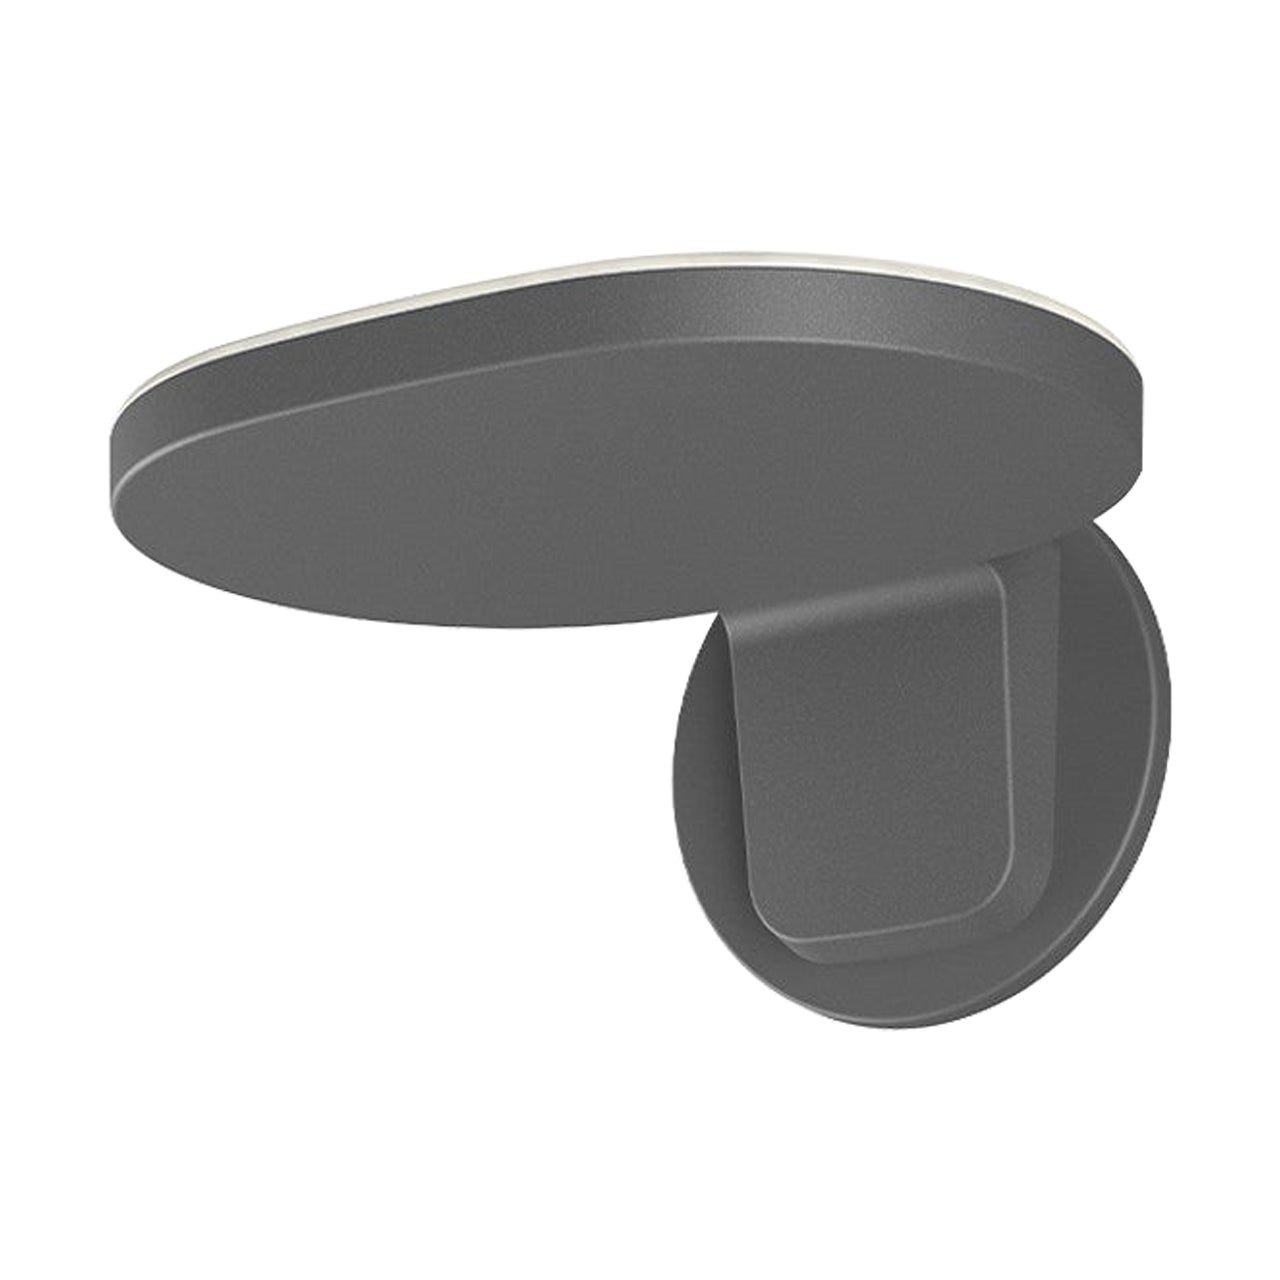 Flos Oplight W1 Small Wall Sconce in Textured Anthracite by Jasper Morrison